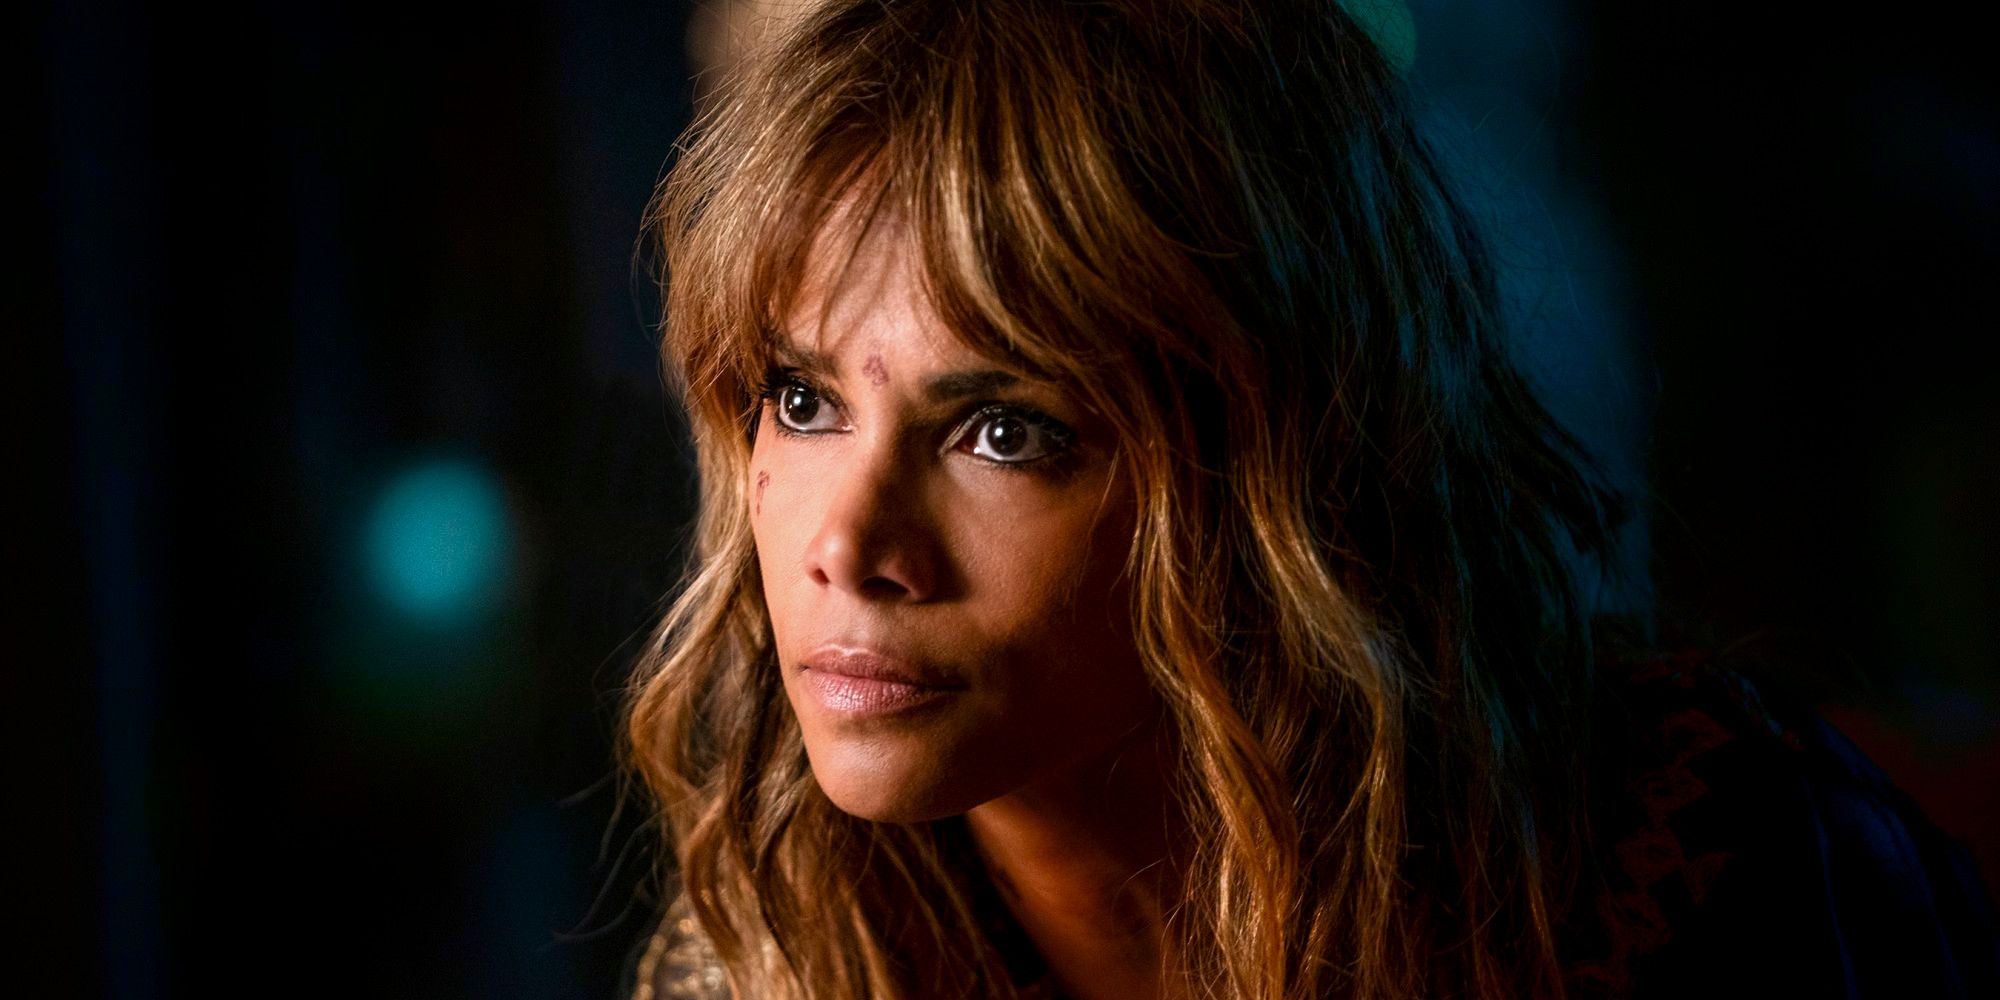 Halle Berry trained for Bruised while filming John Wick 3.